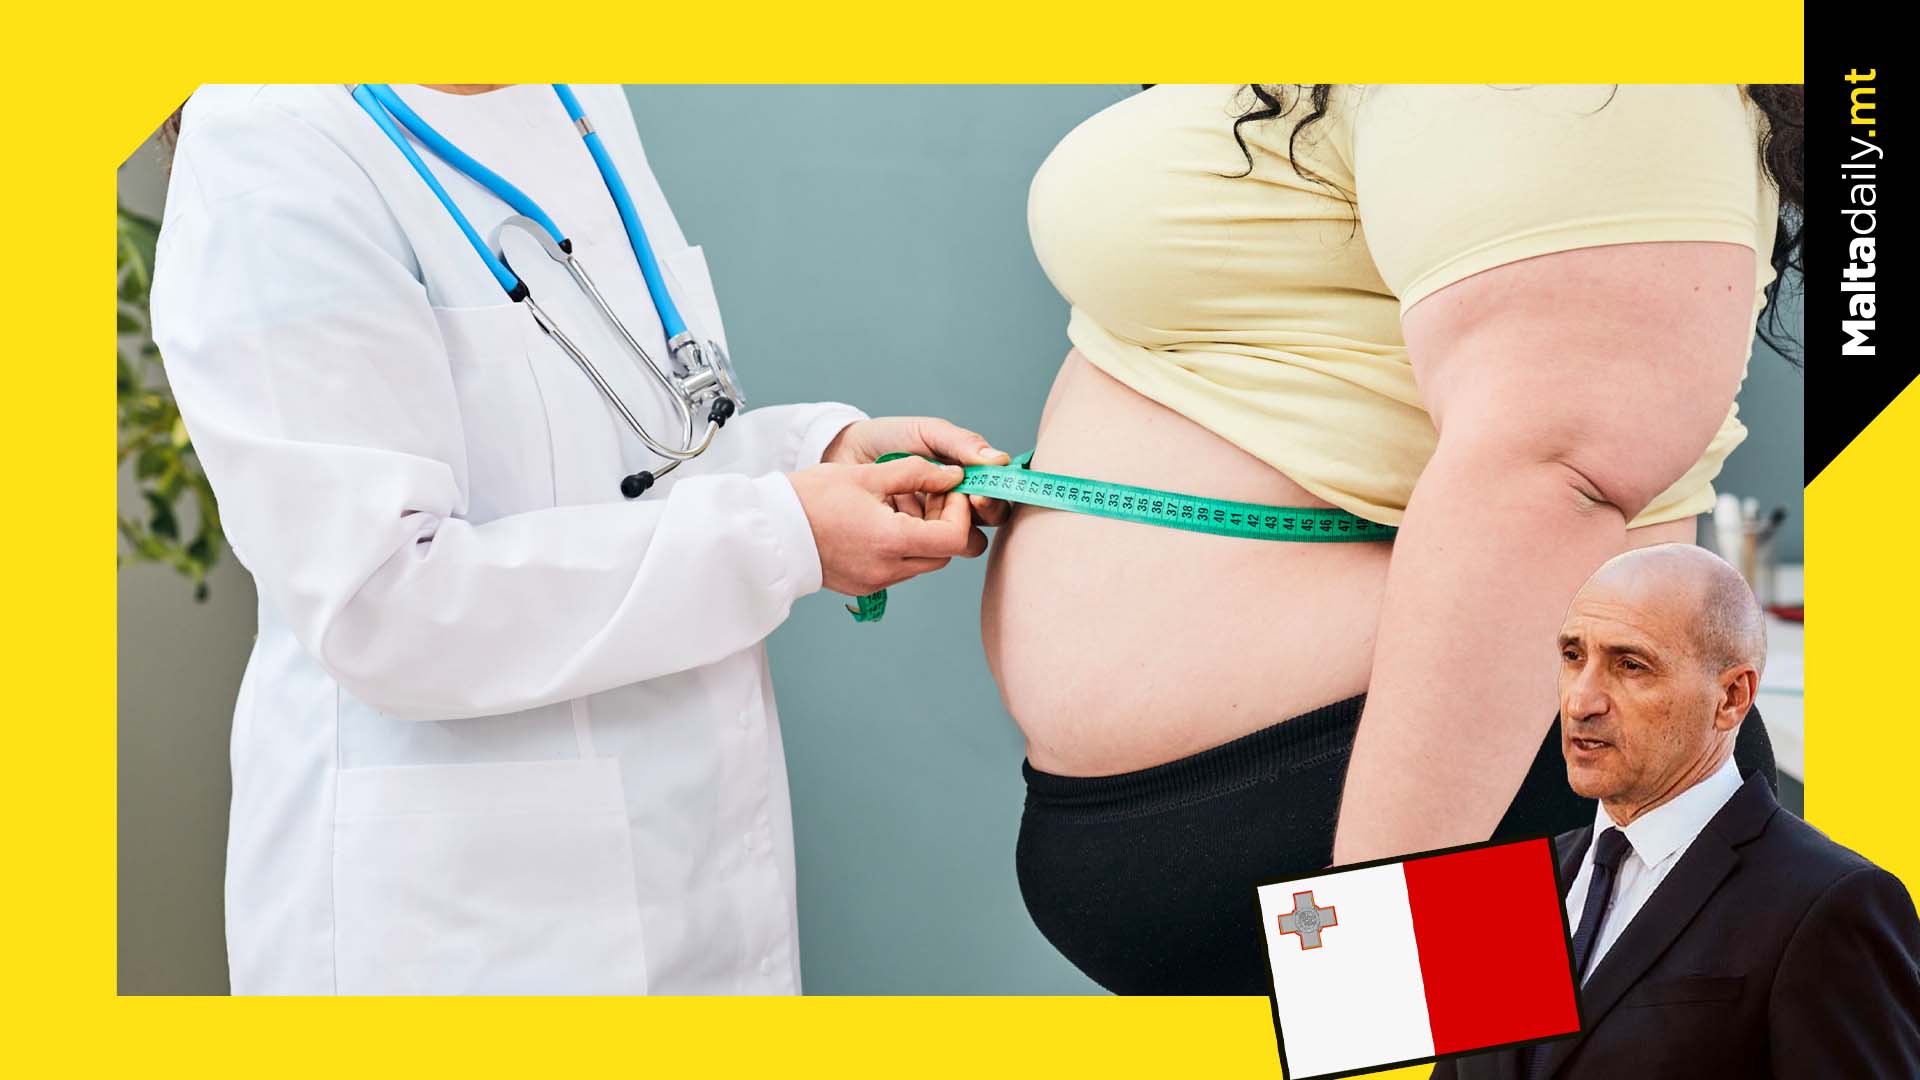 51 hospitalised and 11 died due to obesity in Malta in 2 years